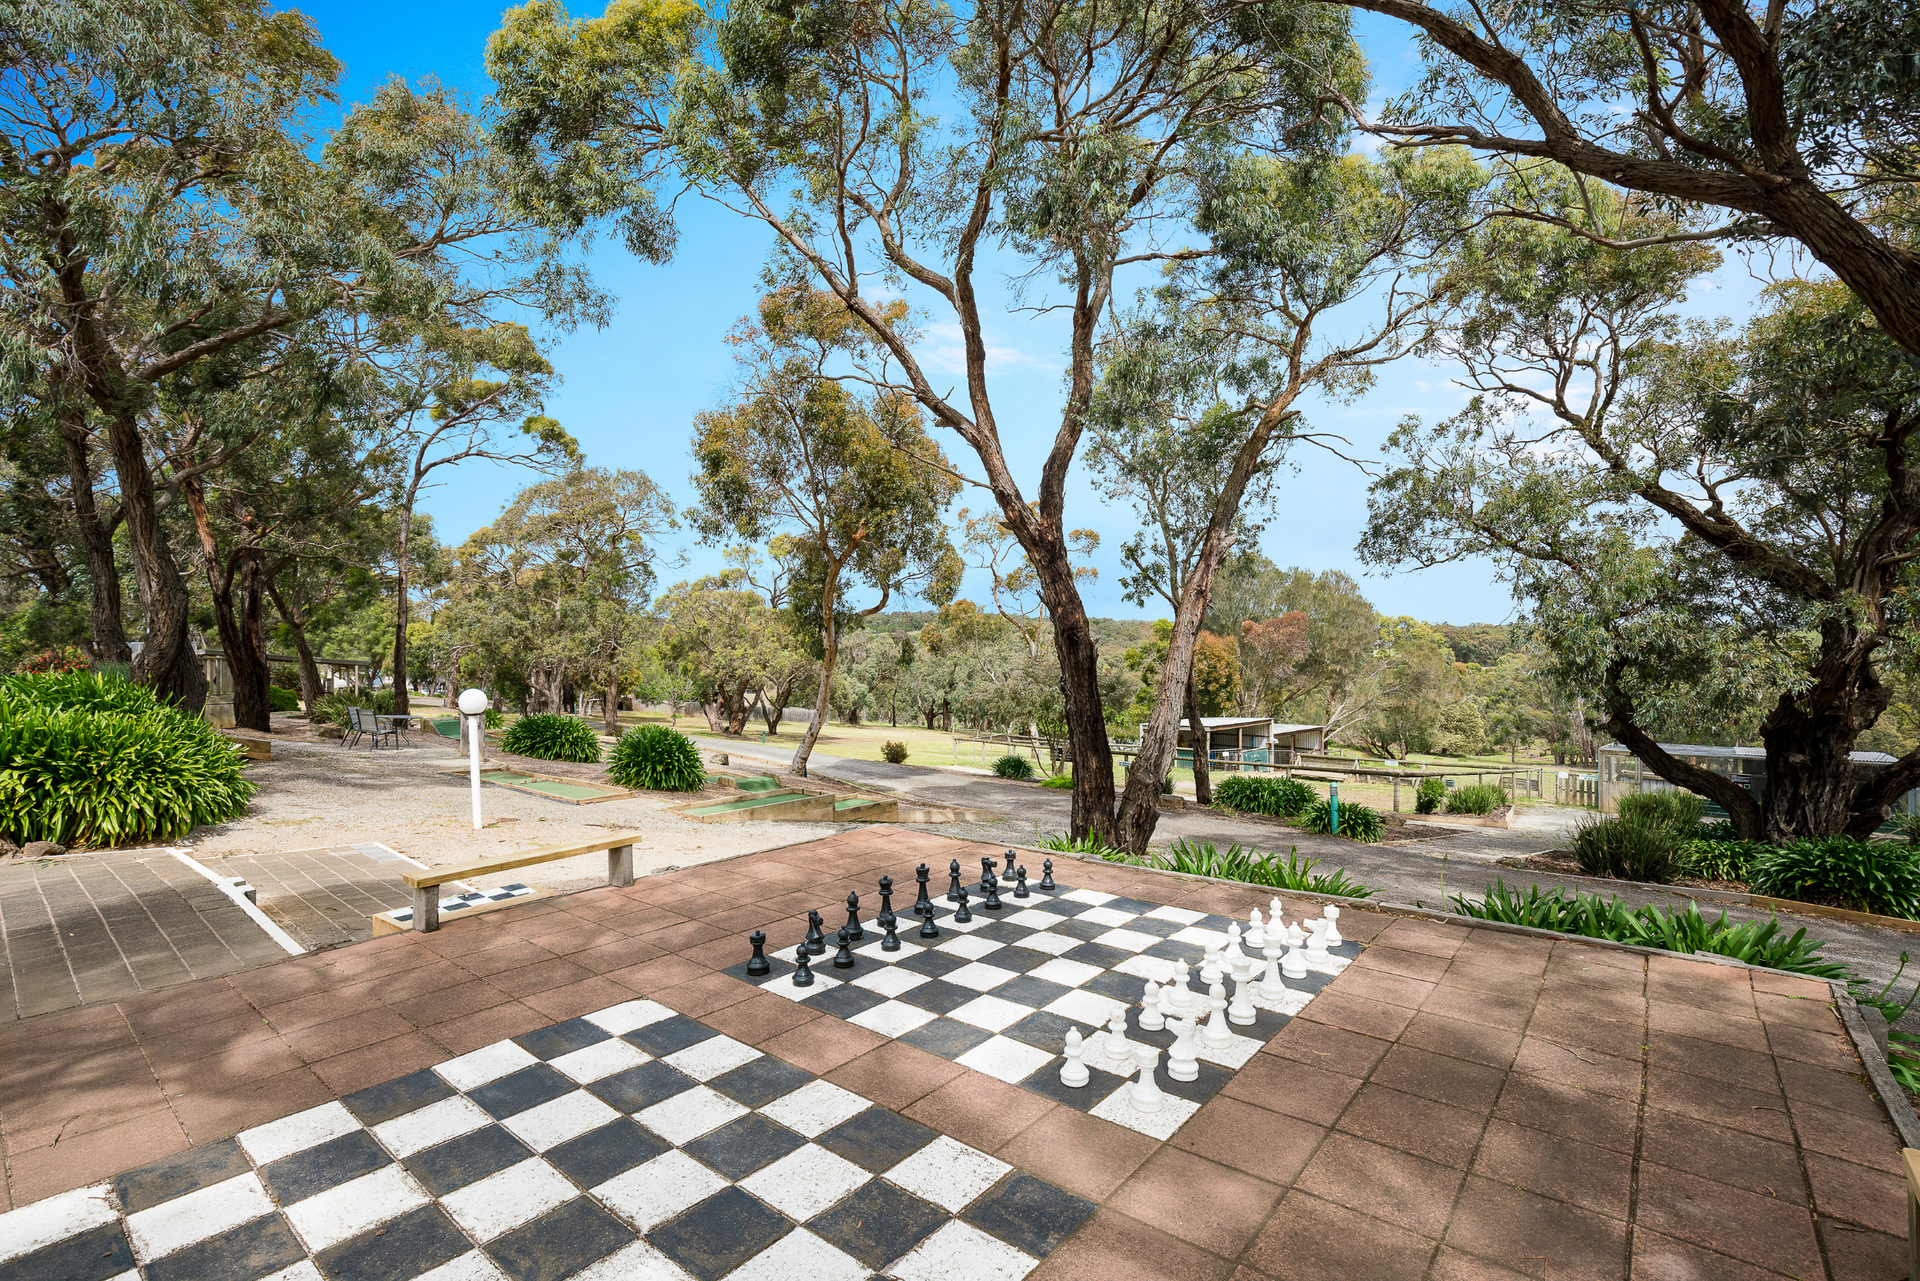 There is a large chess board in the middle of a park.